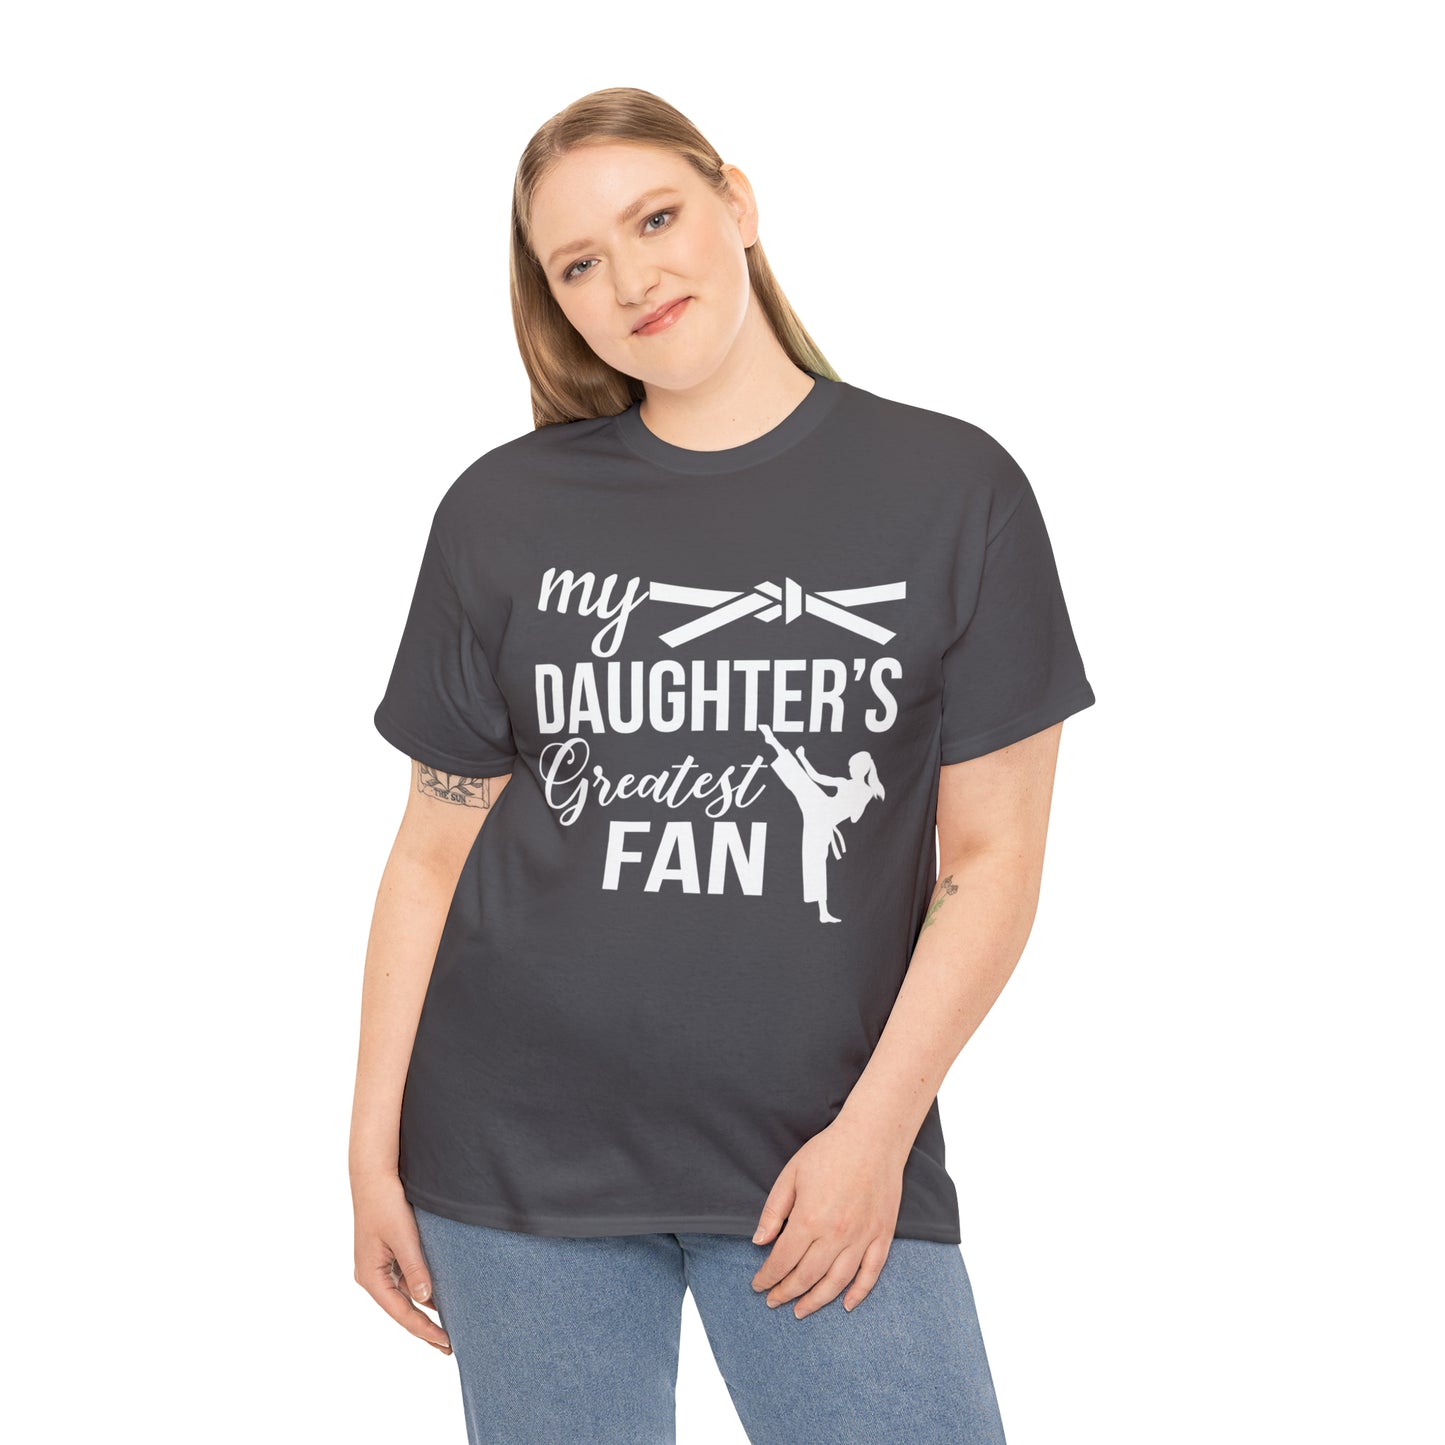 My Daughter's Greatest Fan! Shirt For Mom or Dad Heavy Cotton T-Shirt